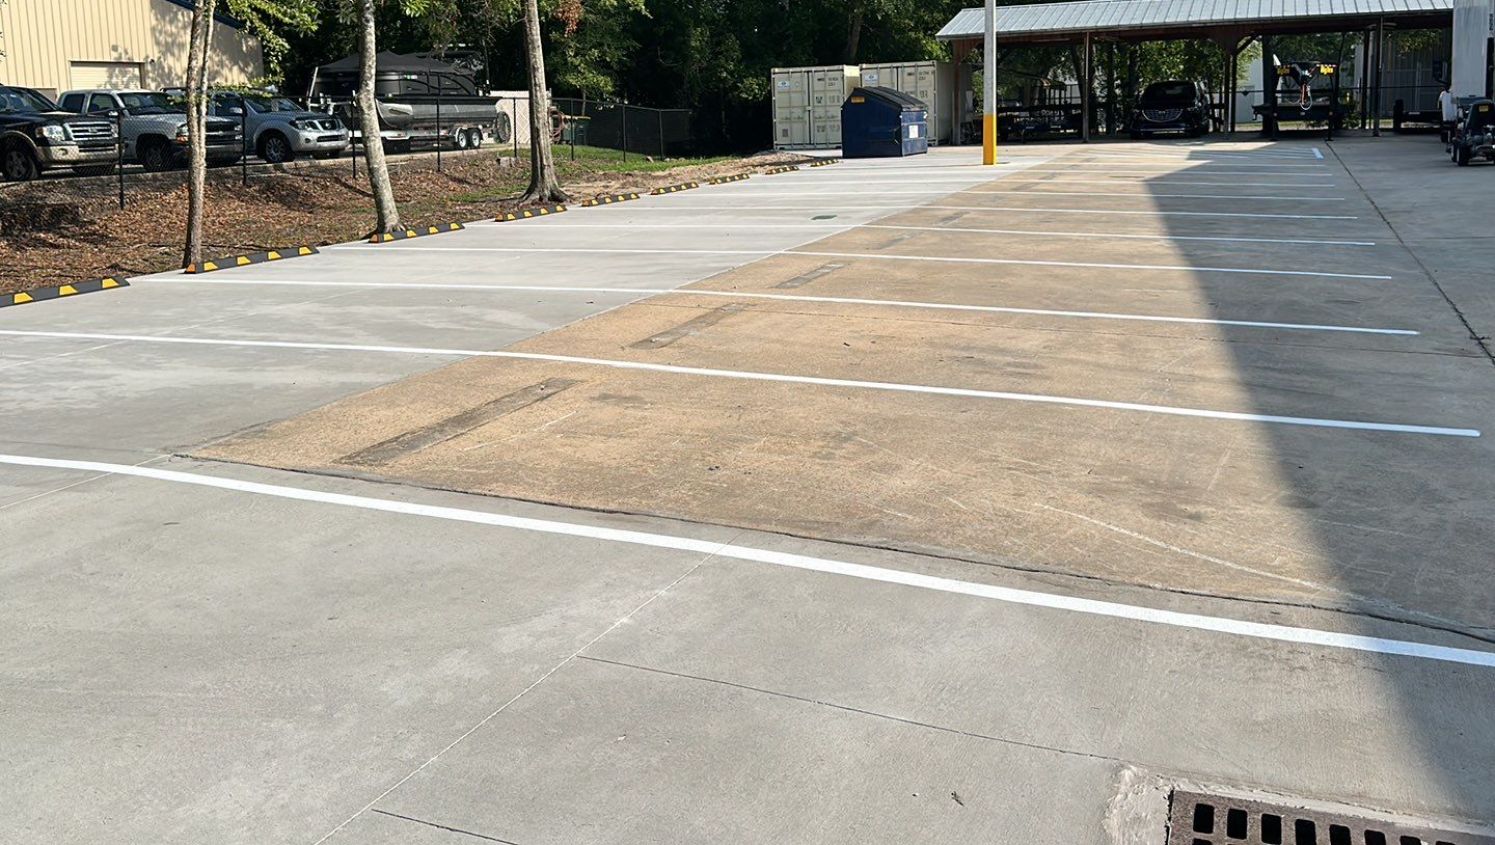 a concrete pad with new parking lines